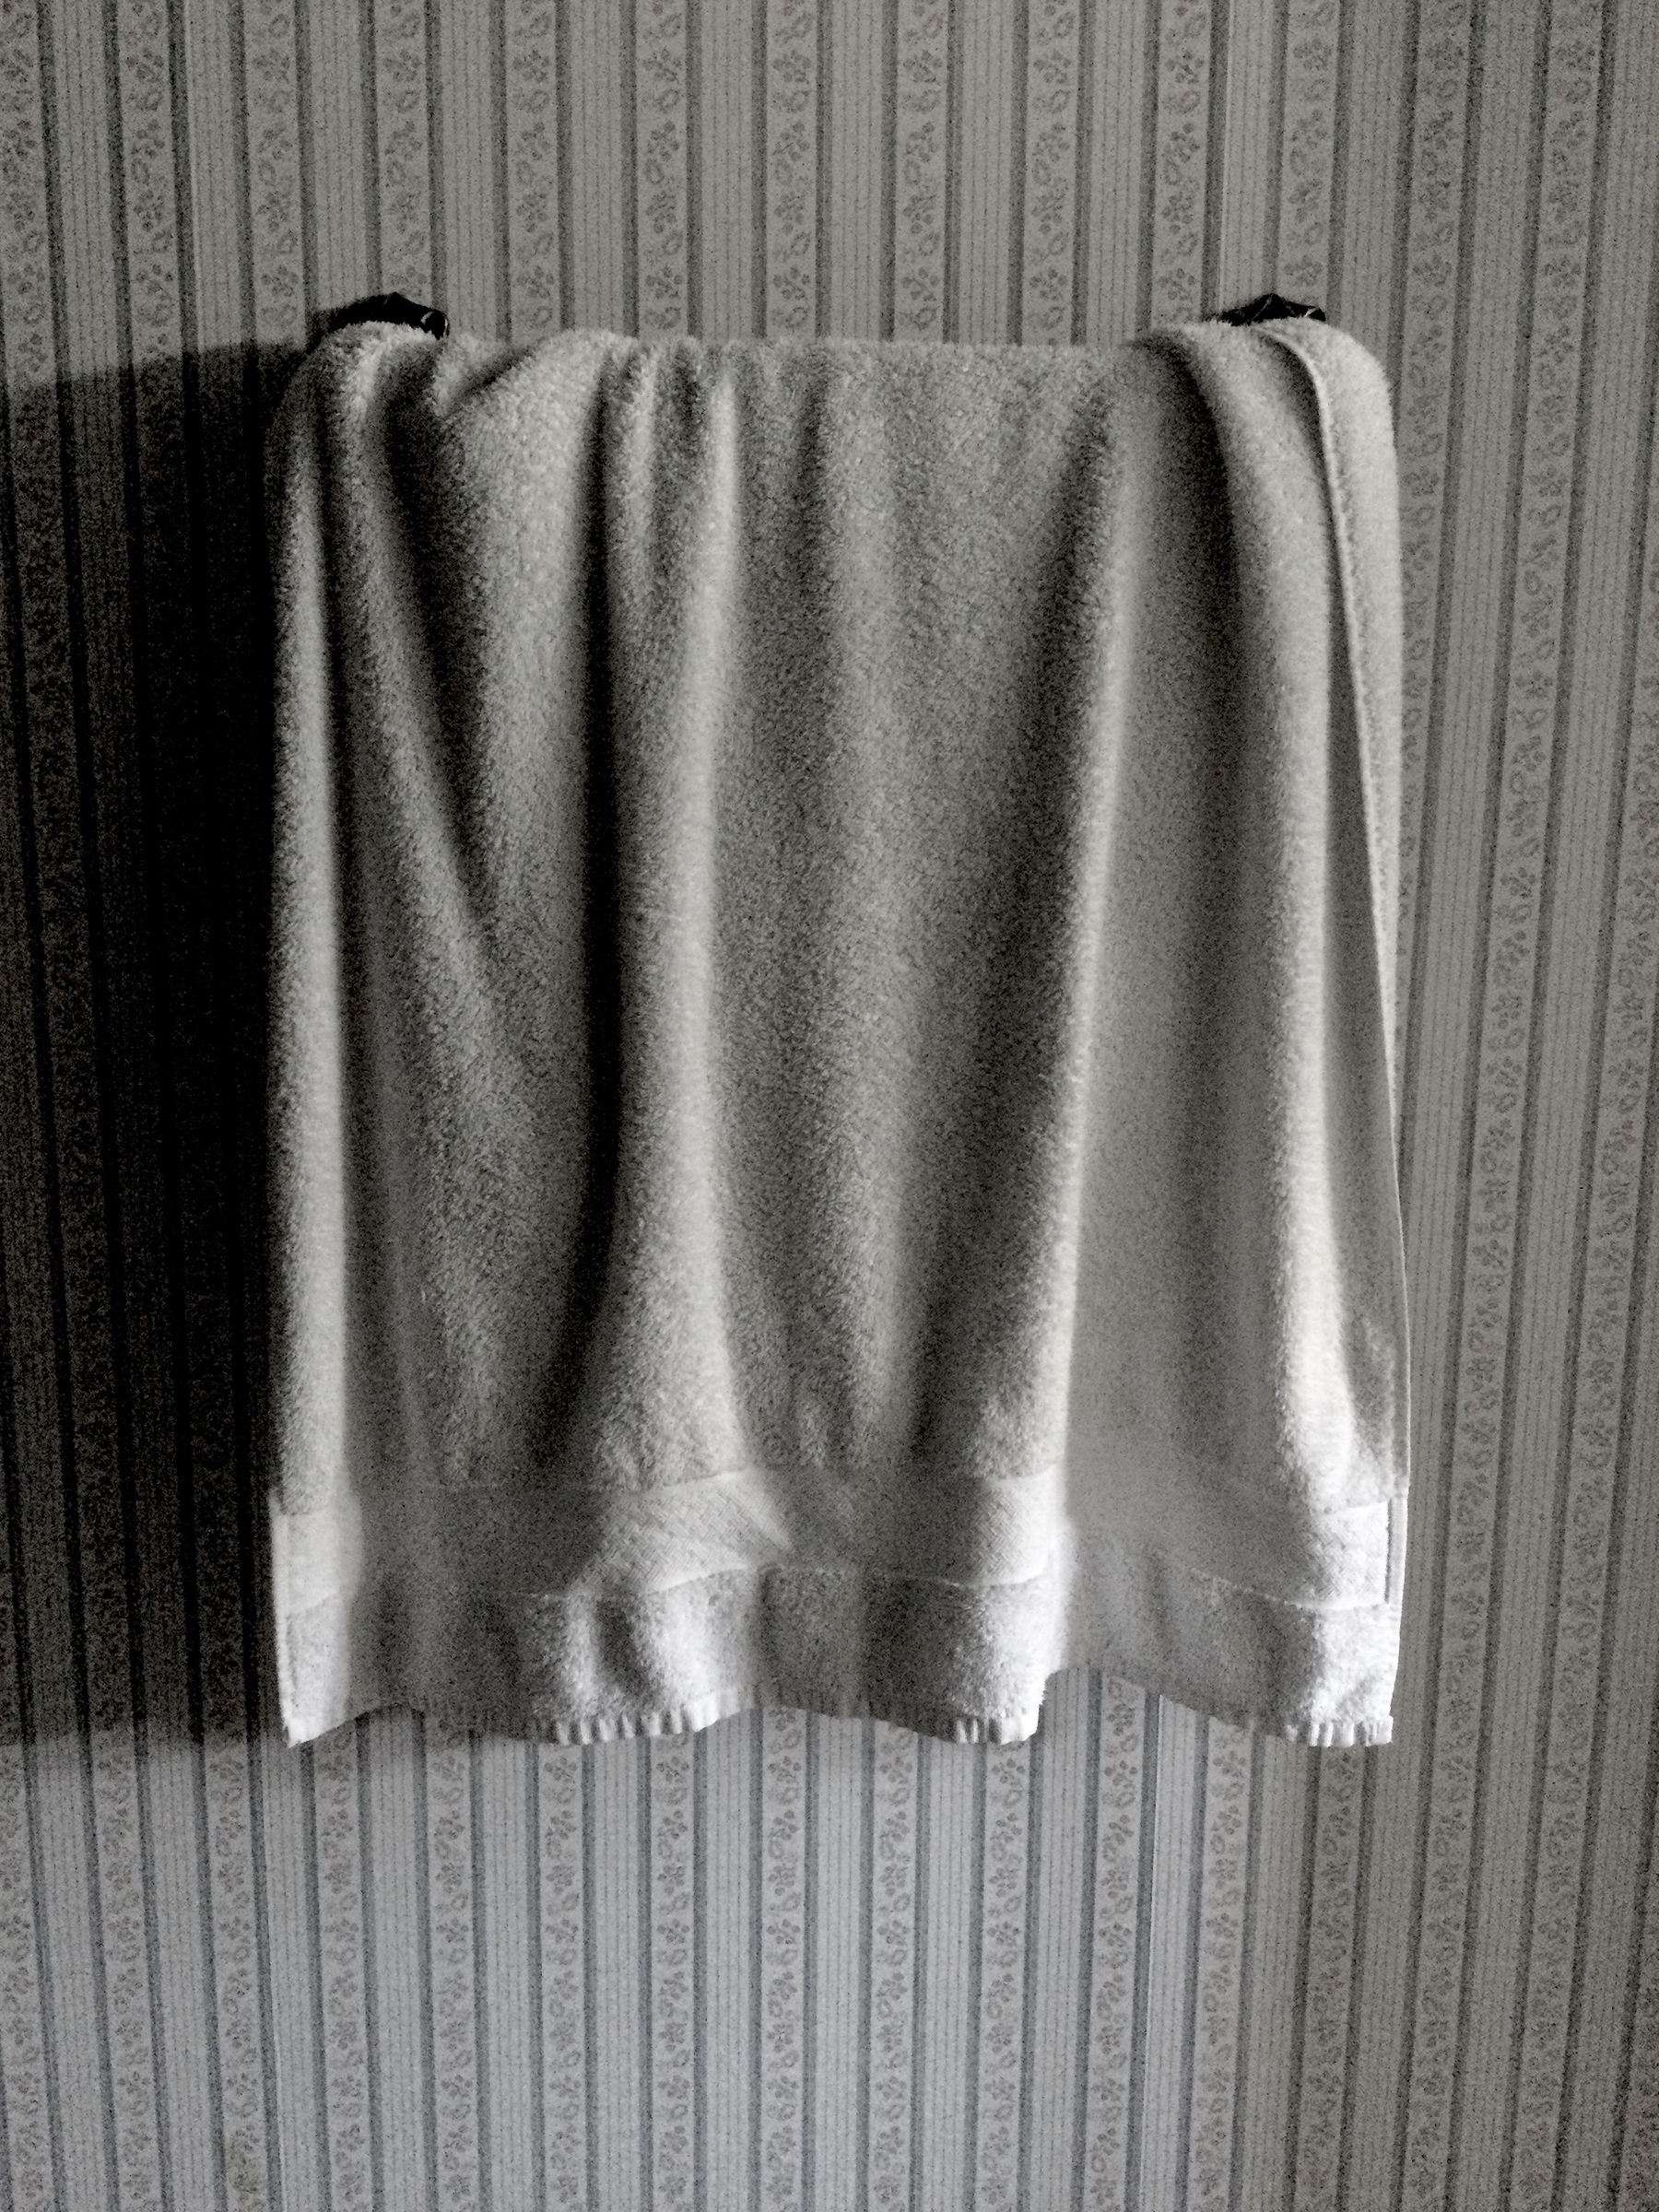 A towel hangs on a rack, many folds catching light from the right, with stripy old-timey wallpaper behind.